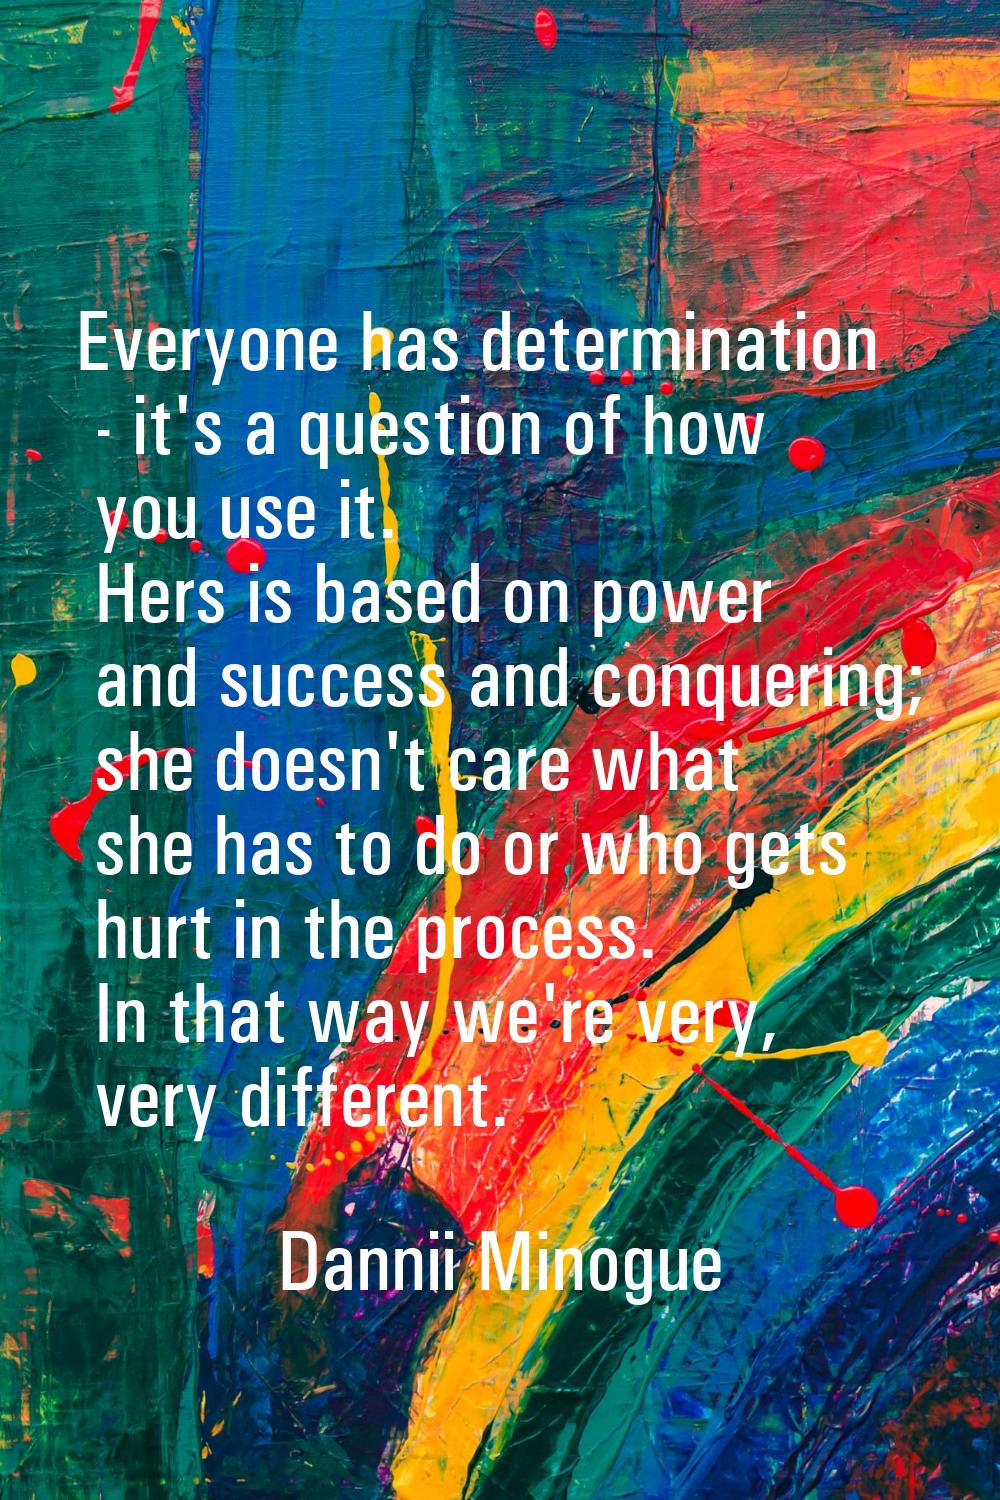 Everyone has determination - it's a question of how you use it. Hers is based on power and success 